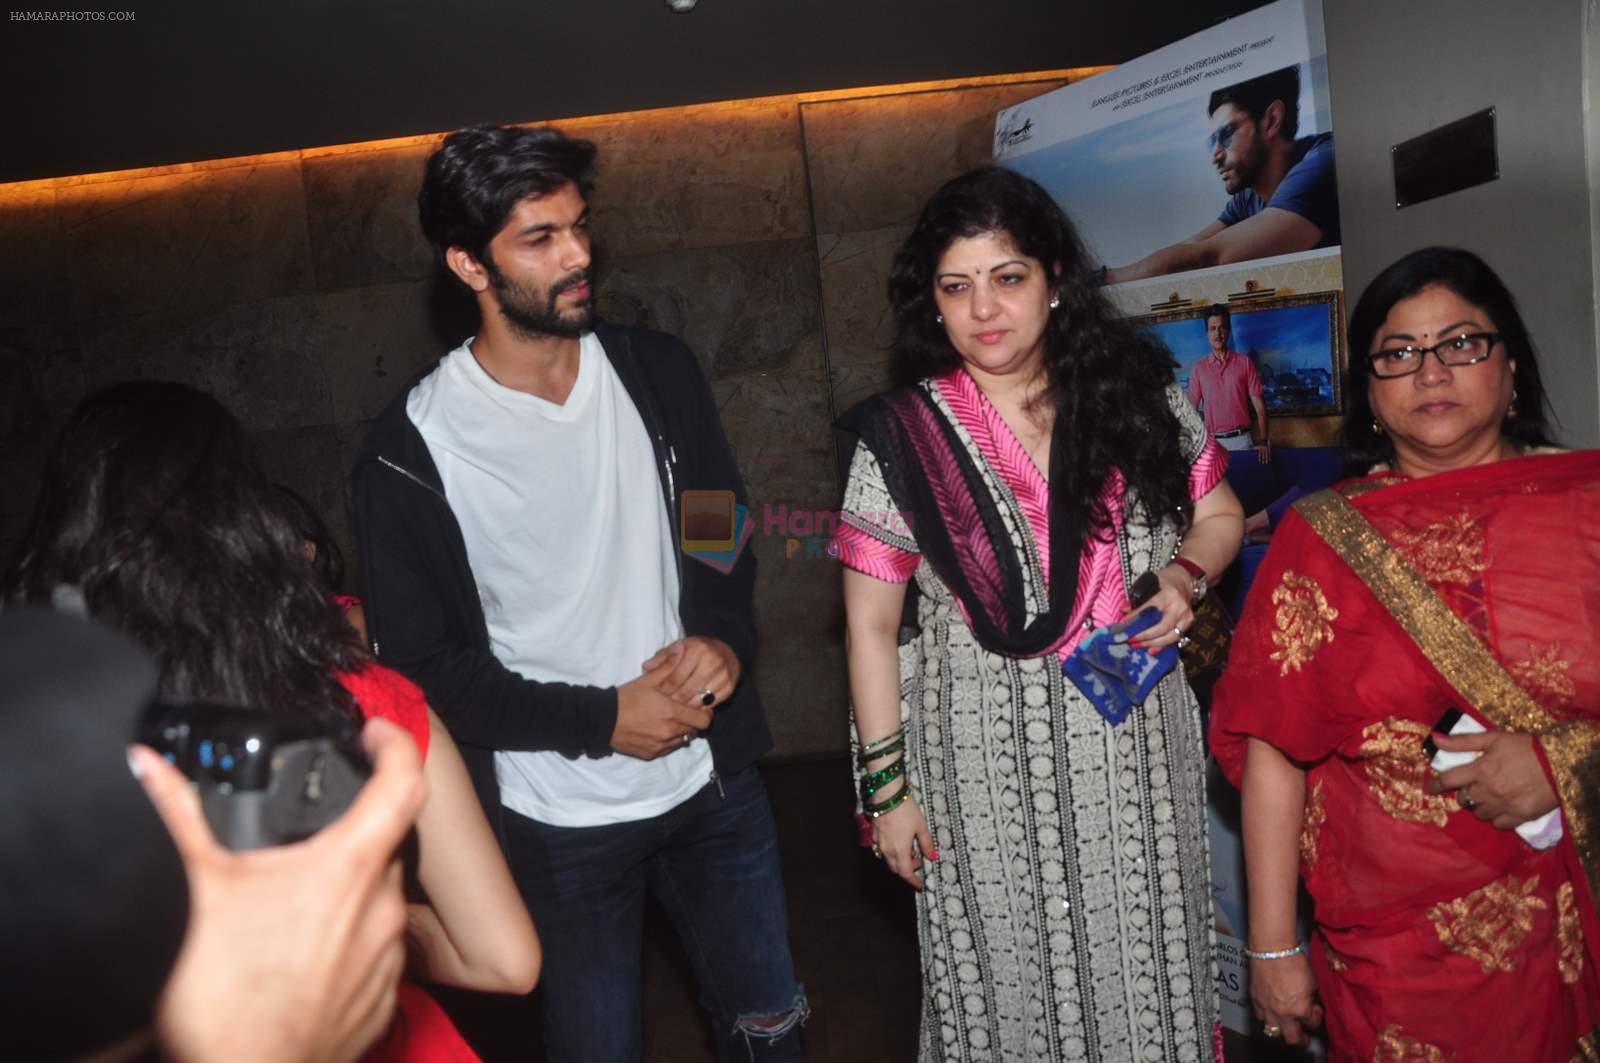 at Lightbox for the screening of Dil Dhadakne Do on 6th June 2015